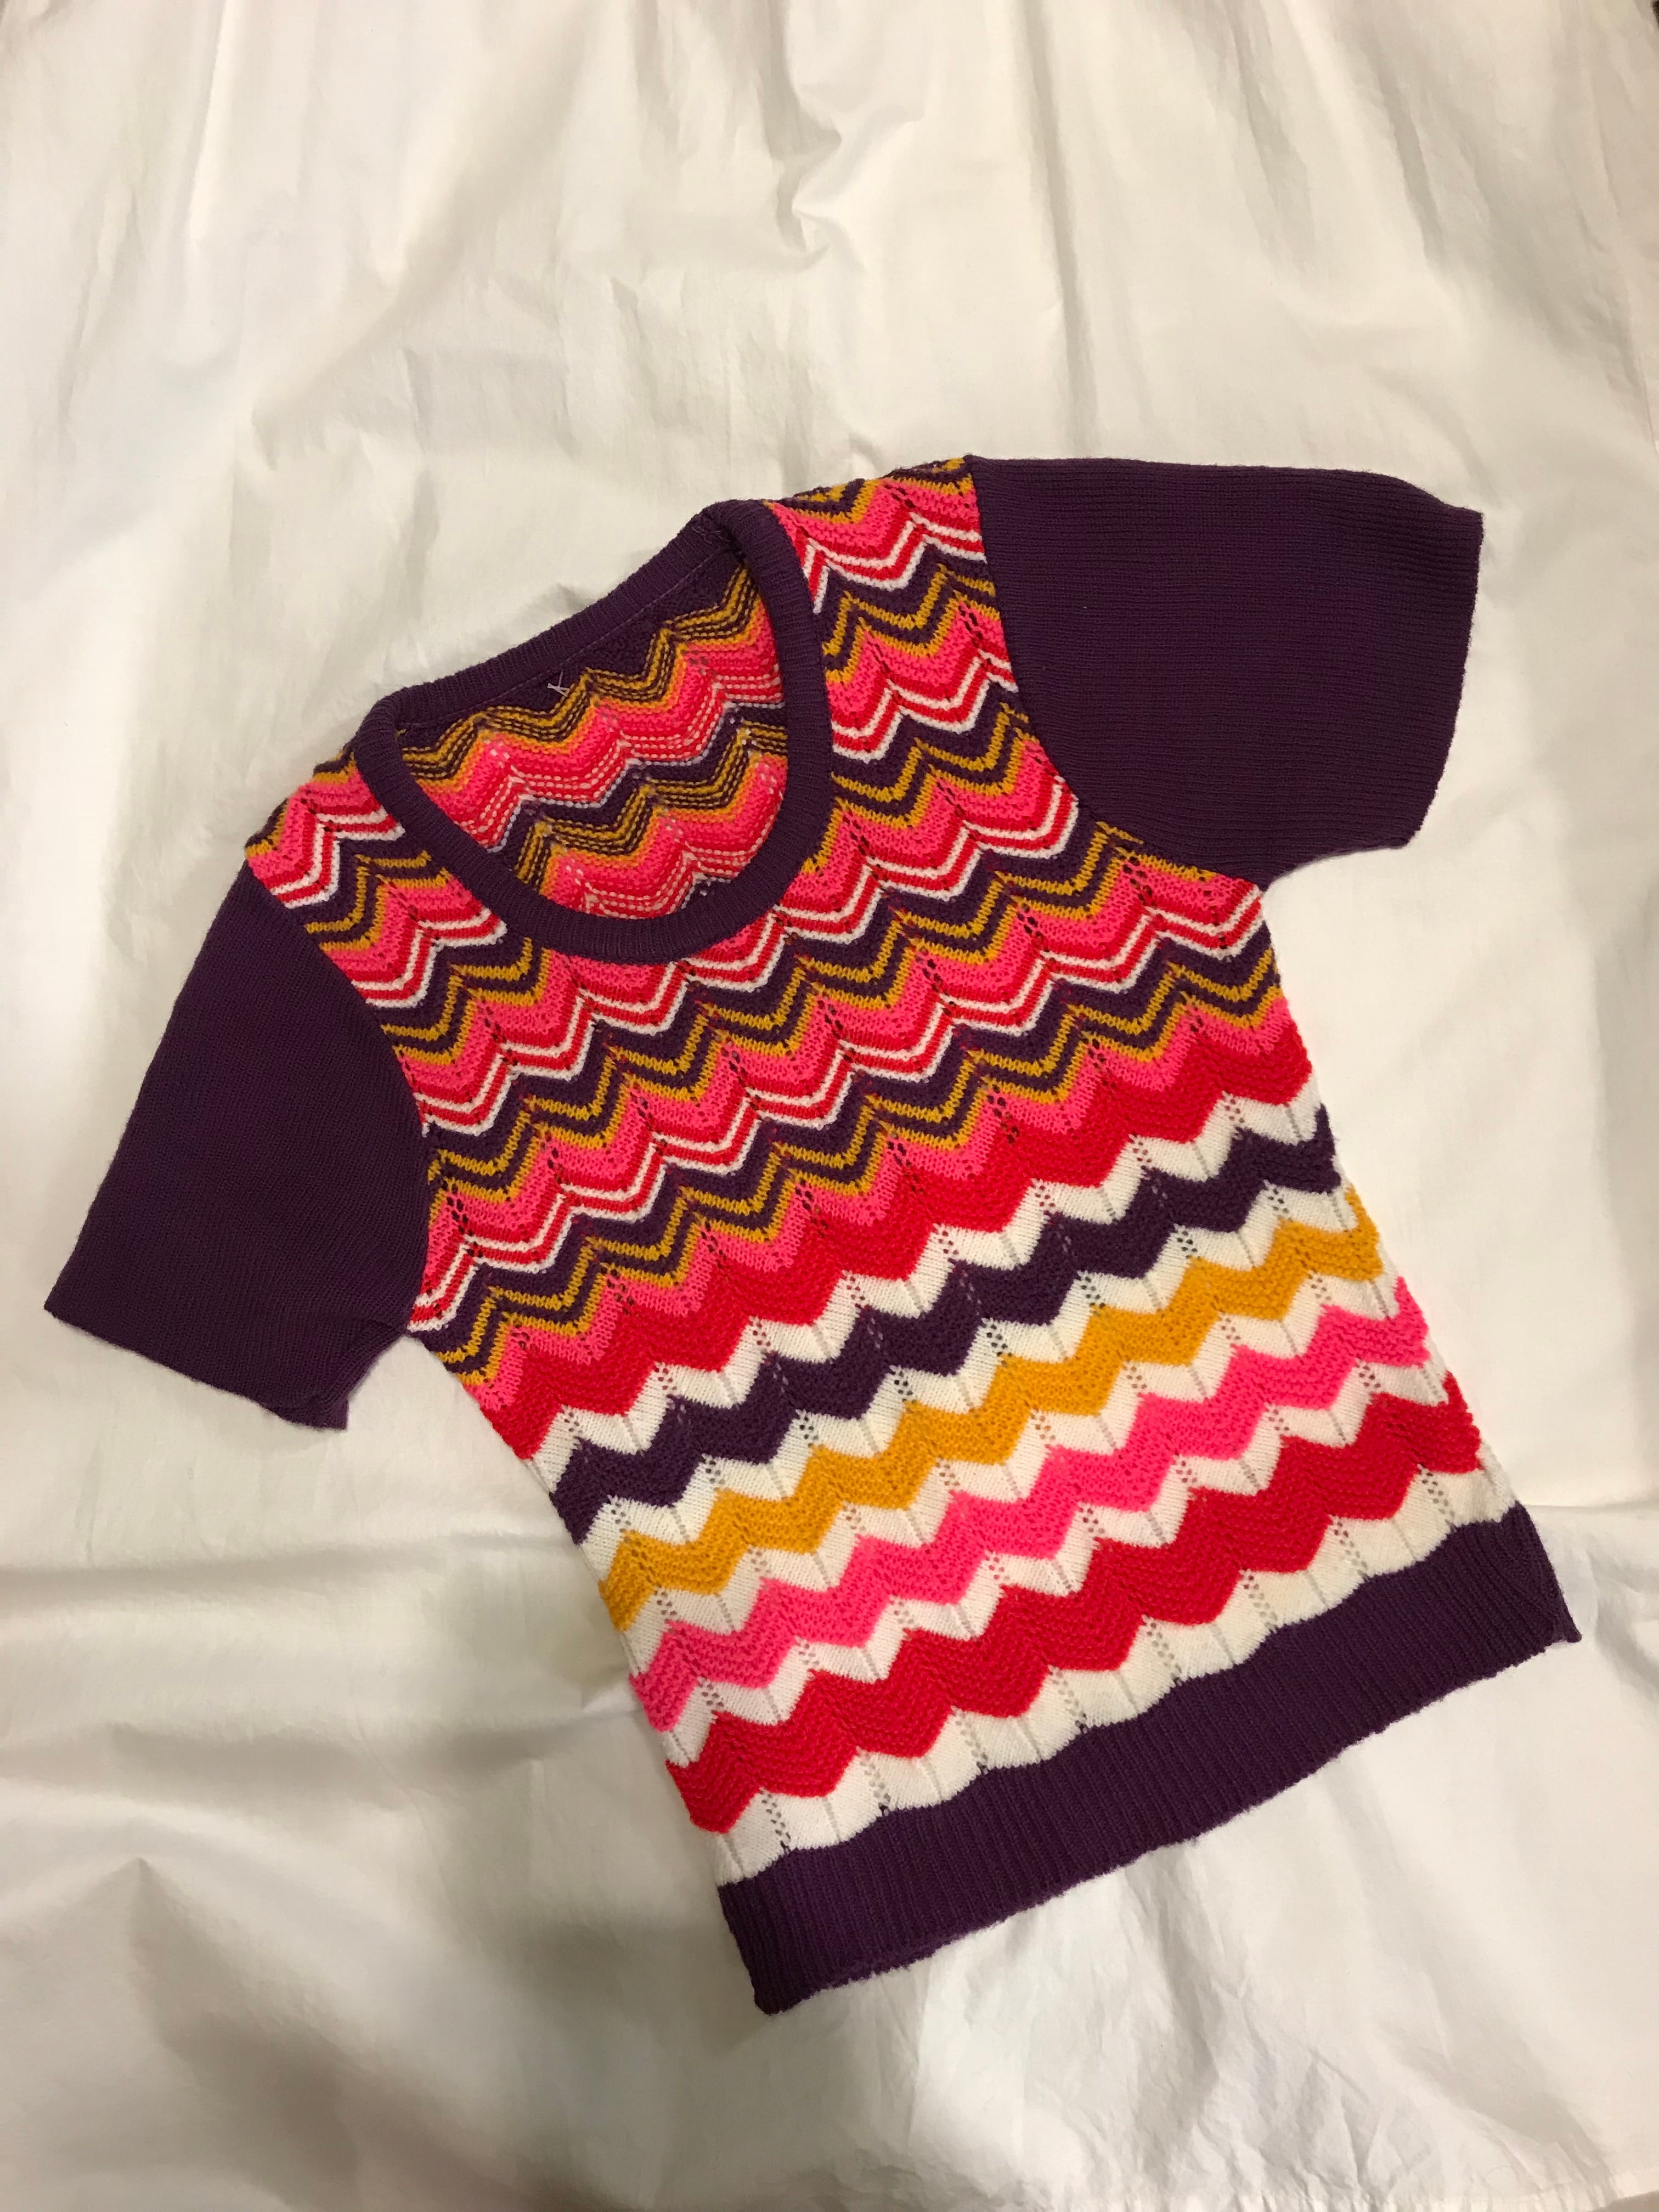 70s purple pink summer knit tops ( ヴィンテージ パープル × ピンク